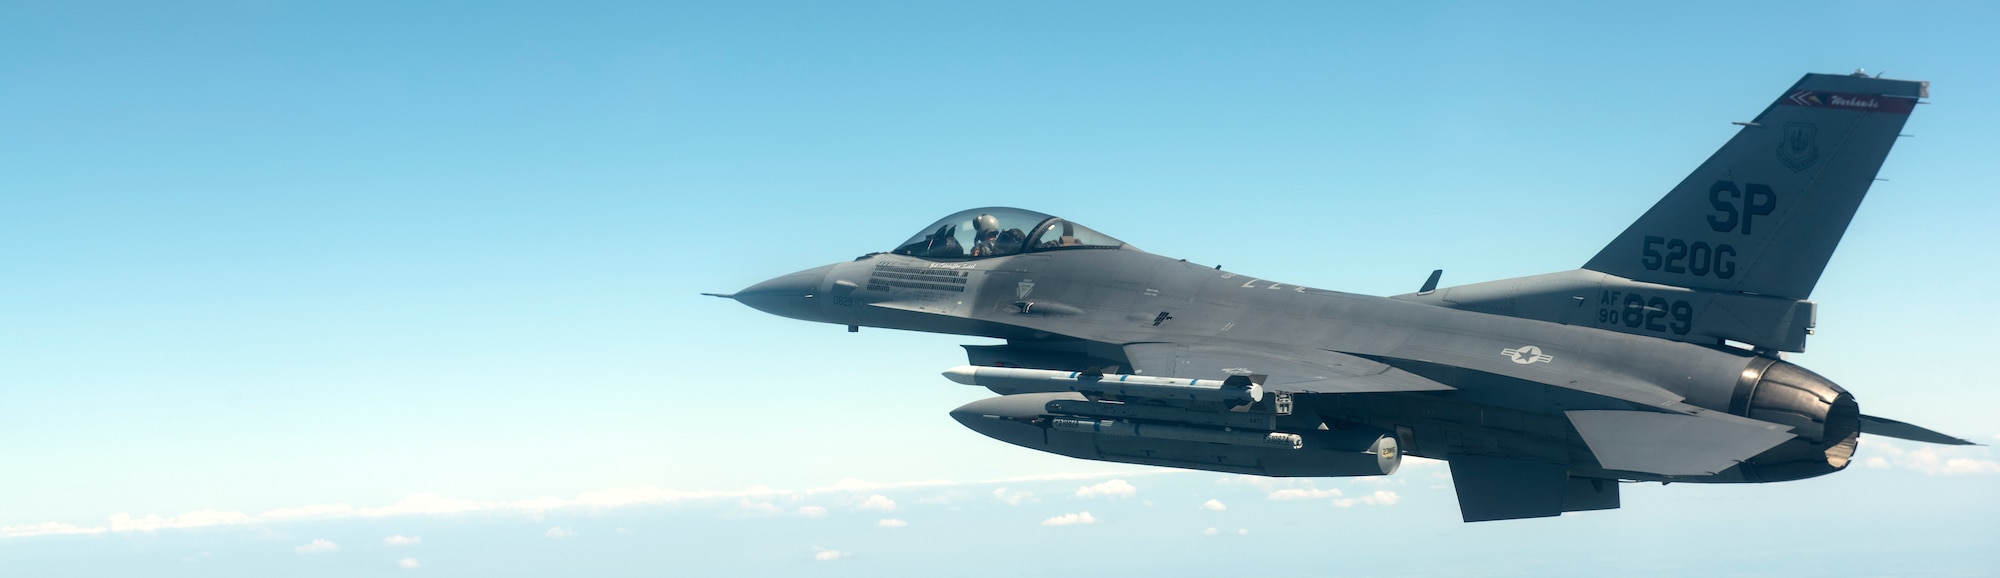 A U.S. Air Force F-16 Fighting Falcon, assigned to the 480th Expeditionary Fighter Squadron, supports Polish Armed Forces Day at Warsaw, Poland, August 15, 2020. The U.S. and Polish partnership is critical in light of growing security challenges, and opportunities to fly and work together help to strengthen this relationship. (U.S. Air Force photo by Senior Airman Chanceler Nardone)